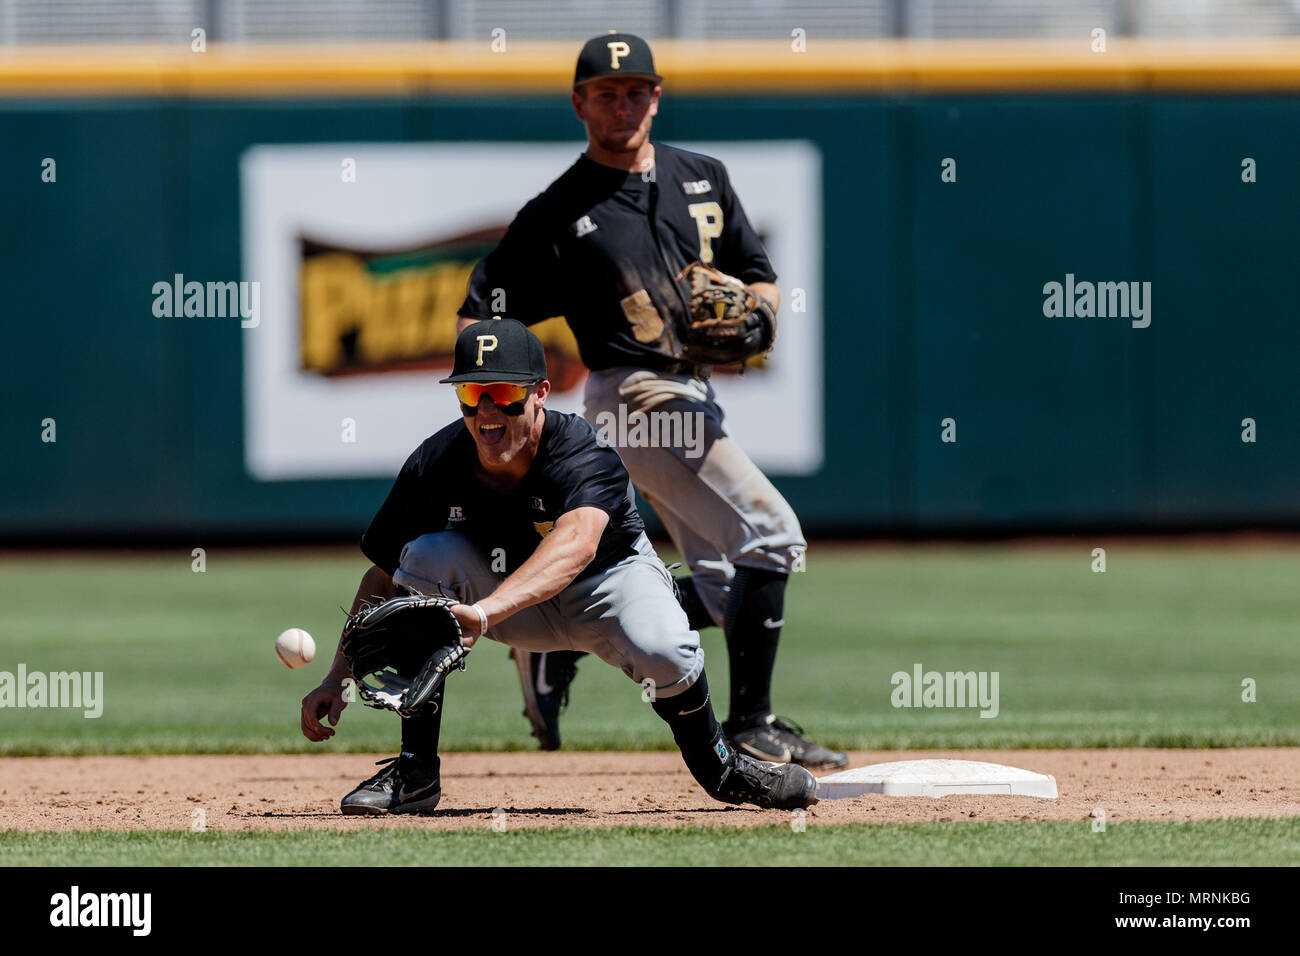 Omaha, NE. 26th May, 2018. U.S. - Purdue second baseman Tyler Powers #2 awaits a throw down to second base in action during the Big Ten Championship Tournament between Purdue Boilermakers and Illinois Fighting Illini at TD Ameritrade Park in Omaha, NE.Minnesota won 8-1.Michael Spomer/Cal Sport Media. Credit: csm/Alamy Live News Stock Photo